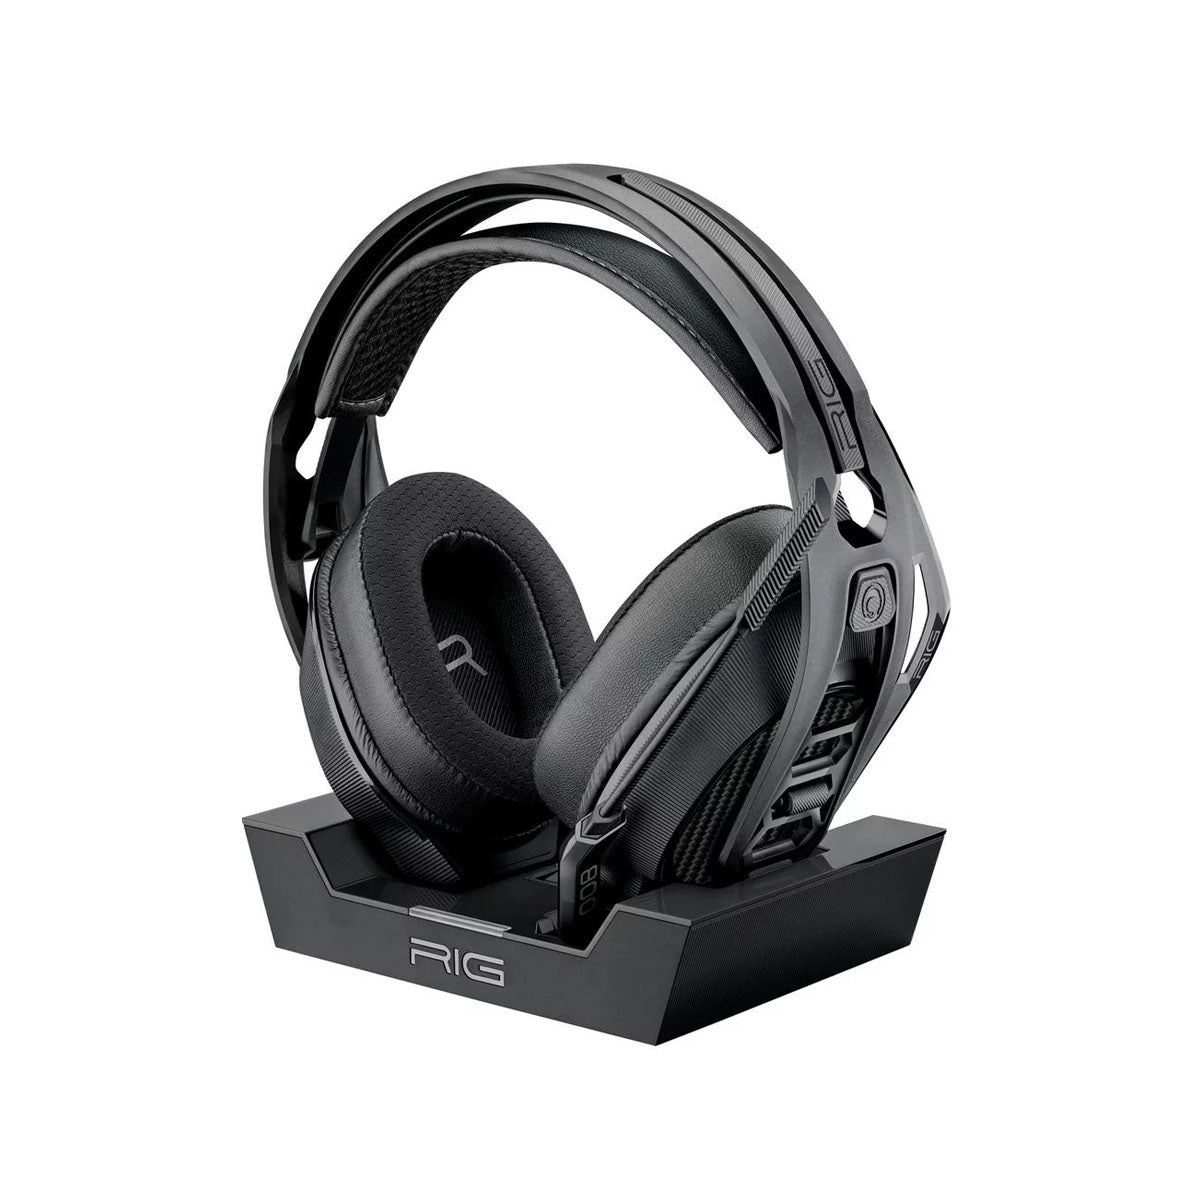 Rig 800 Pro HX Gaming Headset For Xbox Series X|S and Xbox One..